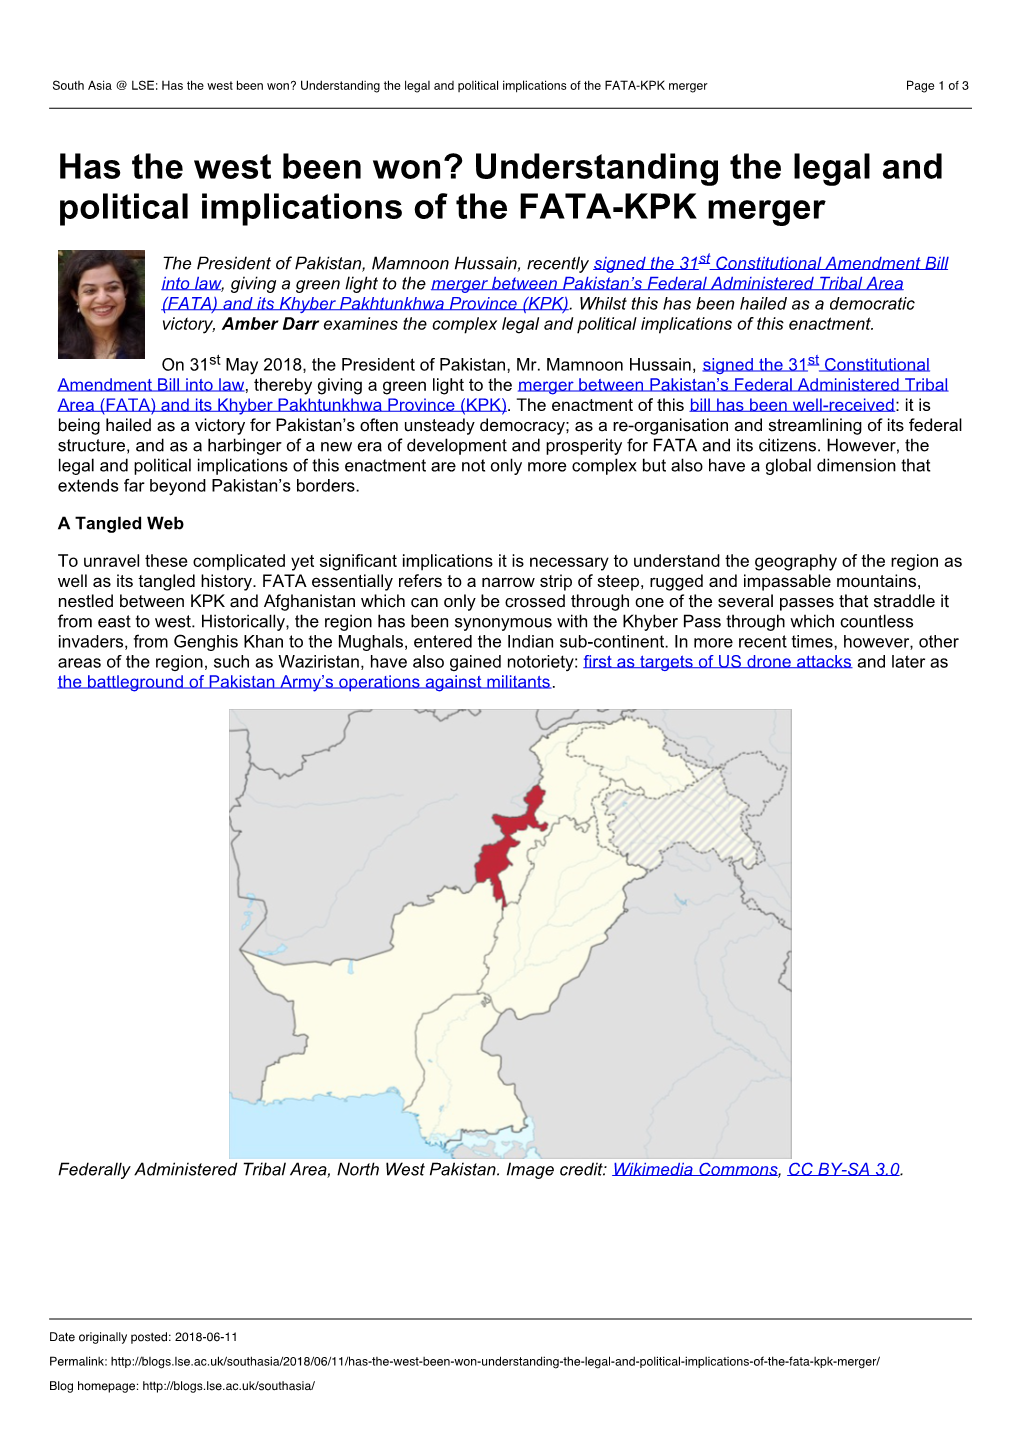 South Asia @ LSE: Has the West Been Won? Understanding the Legal and Political Implications of the FATA-KPK Merger Page 1 of 3